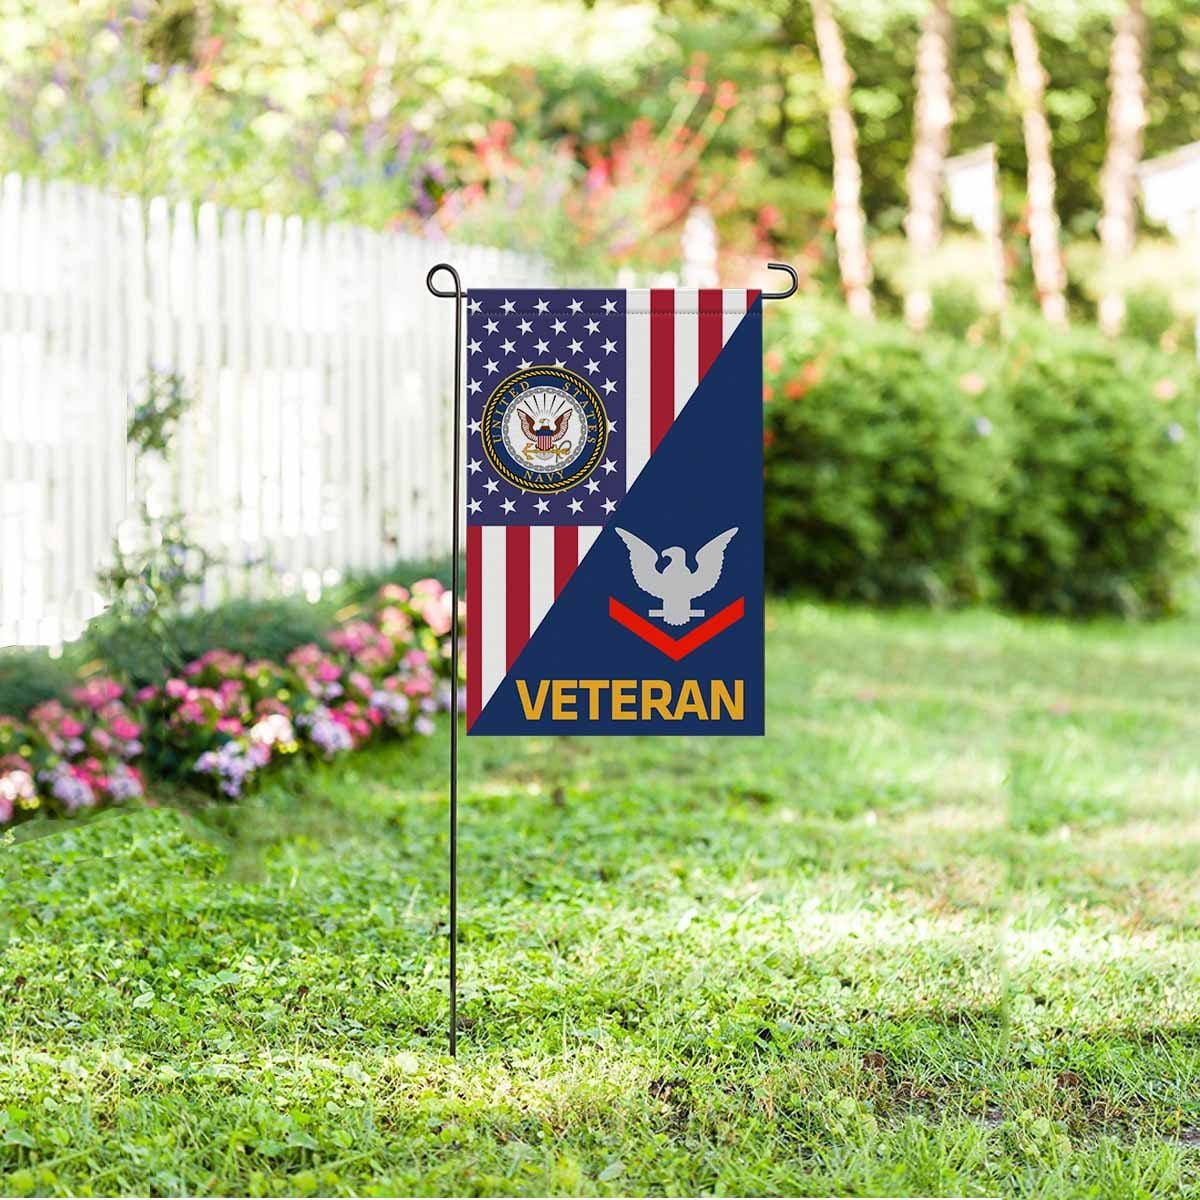 US Navy E-4 Petty Officer Third Class E4 PO3 Collar Device Veteran Garden Flag/Yard Flag 12 inches x 18 inches Twin-Side Printing-GDFlag-Navy-Collar-Veterans Nation